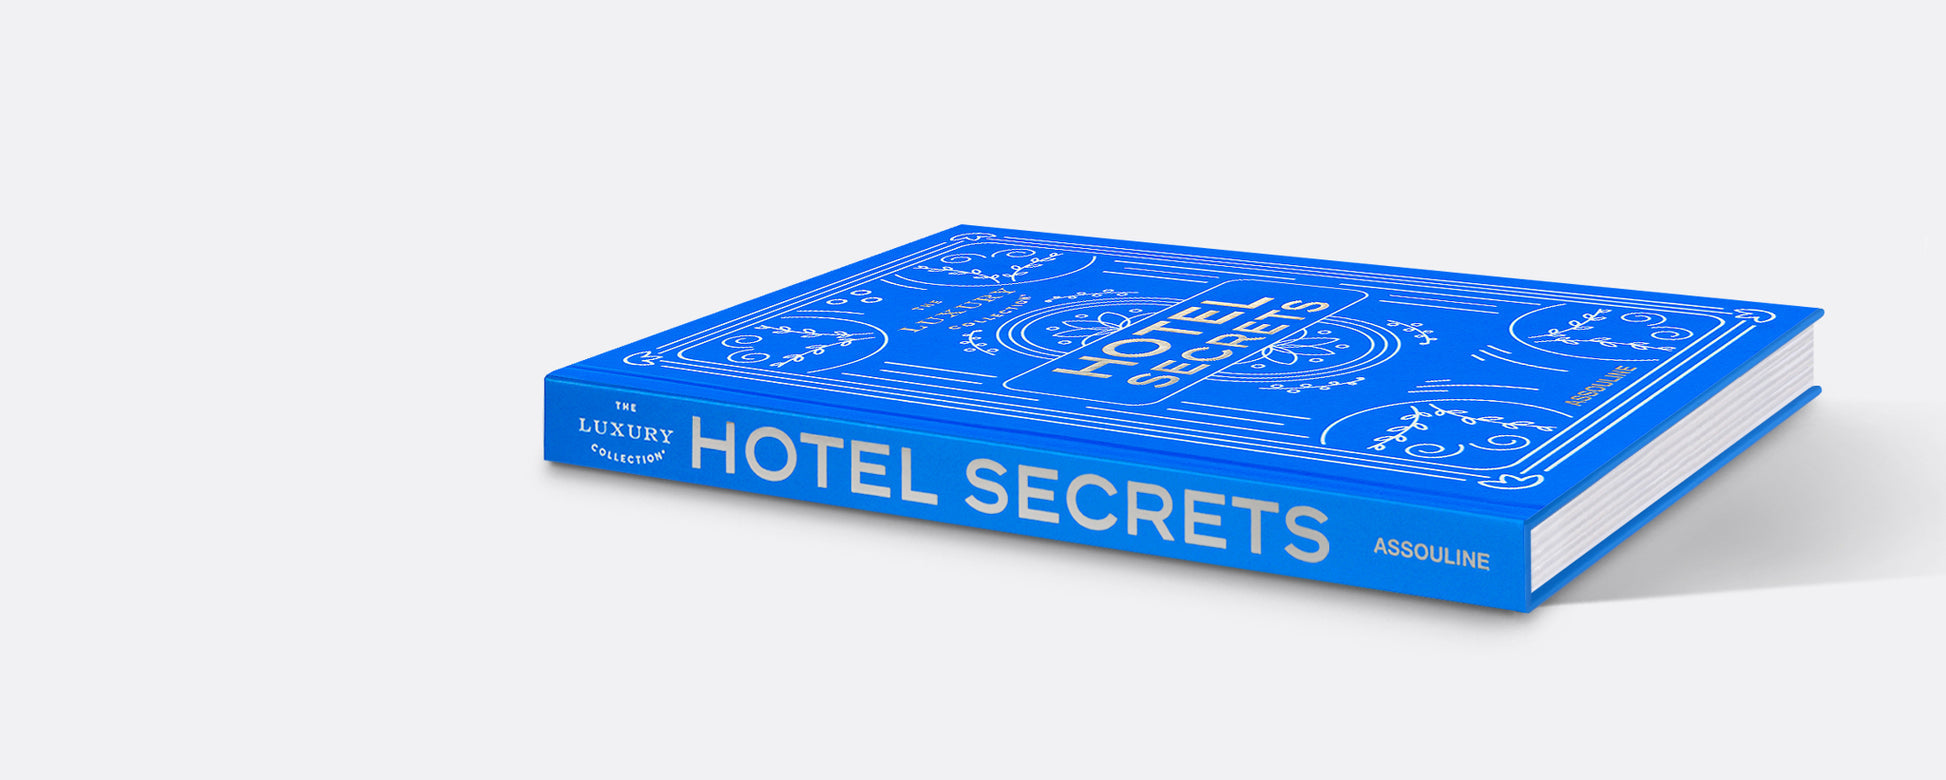 Assouline | The Luxury Collection: Hotel Secrets